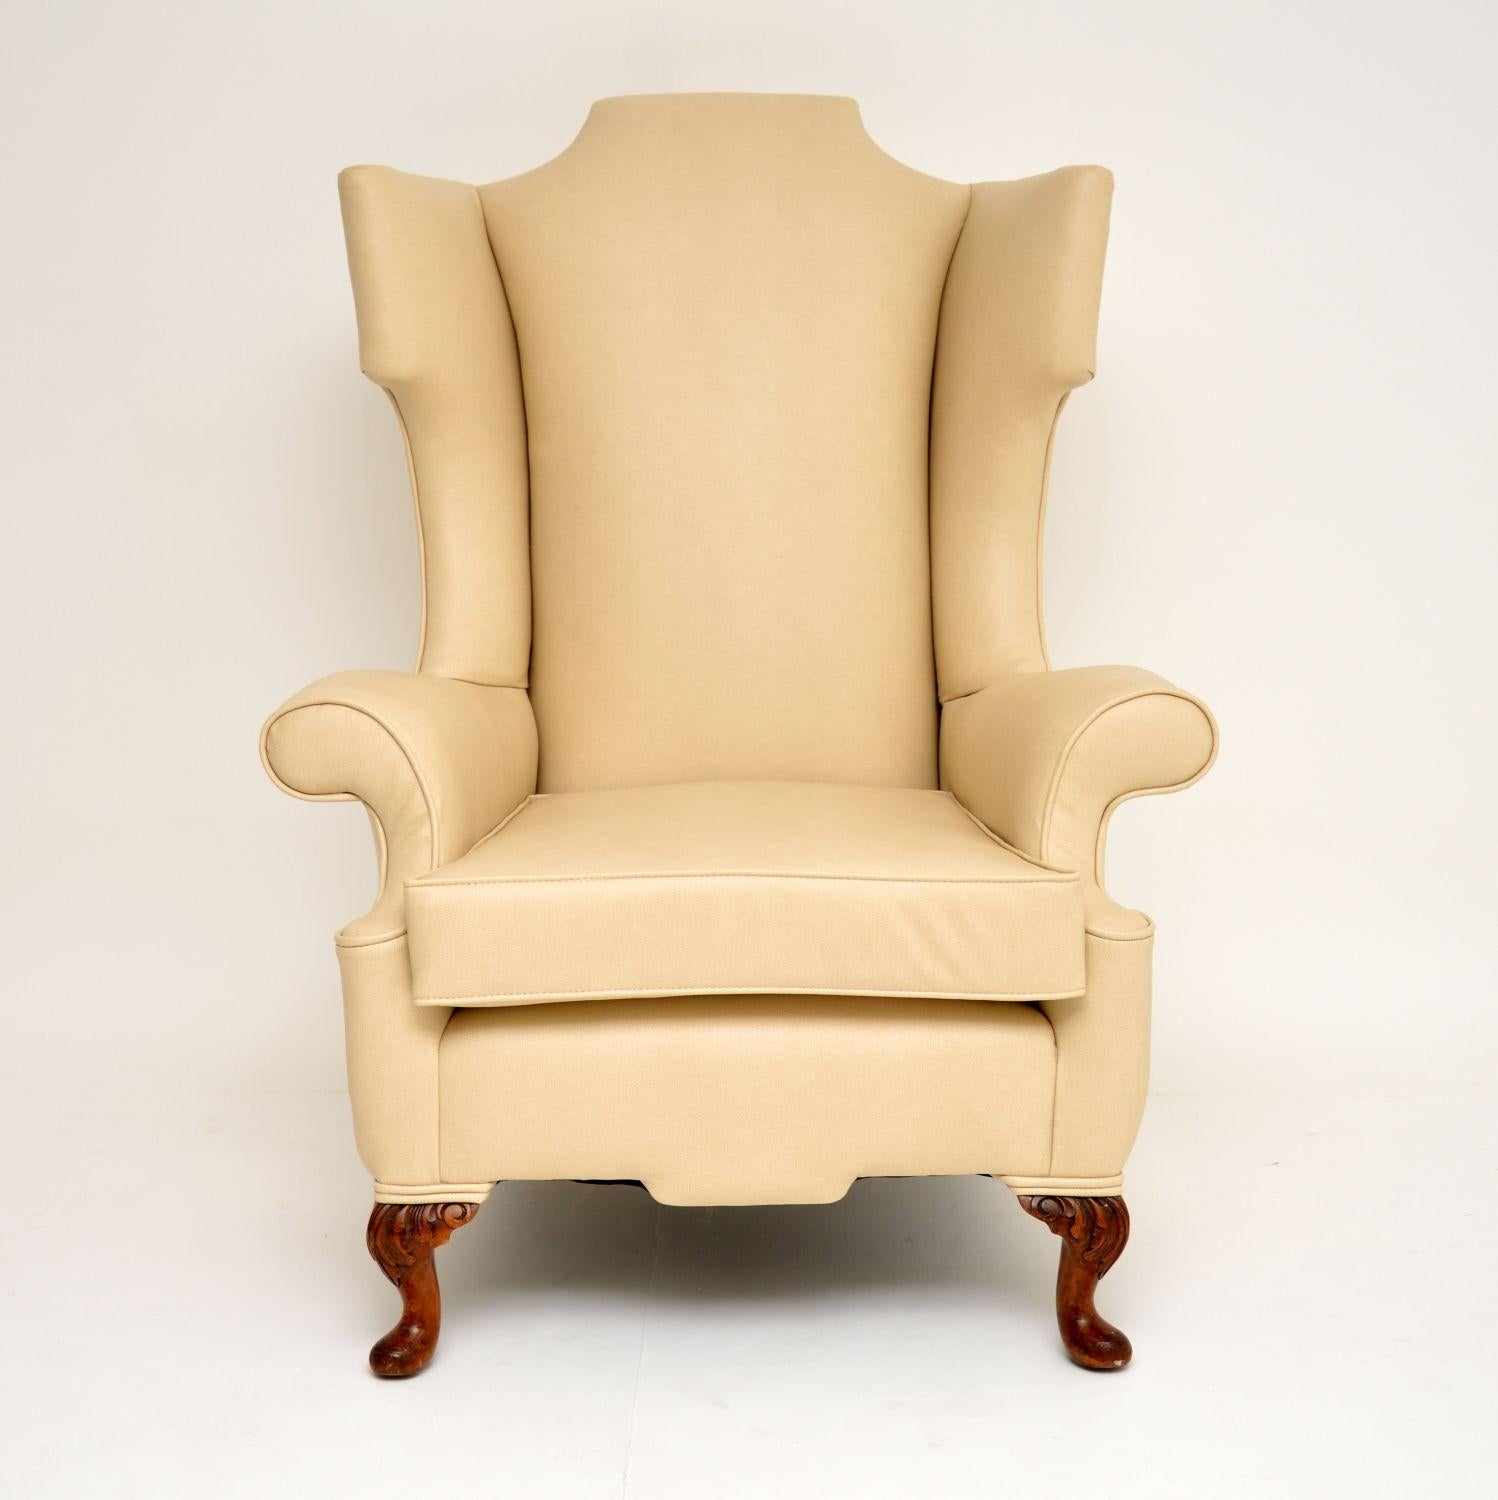 This antique Chippendale style wing armchair is extremely comfortable with good back support & generous proportions.

It’s just been re-upholstered in a top quality imitation textured leather, which has a lovely soft feel & actually feels like